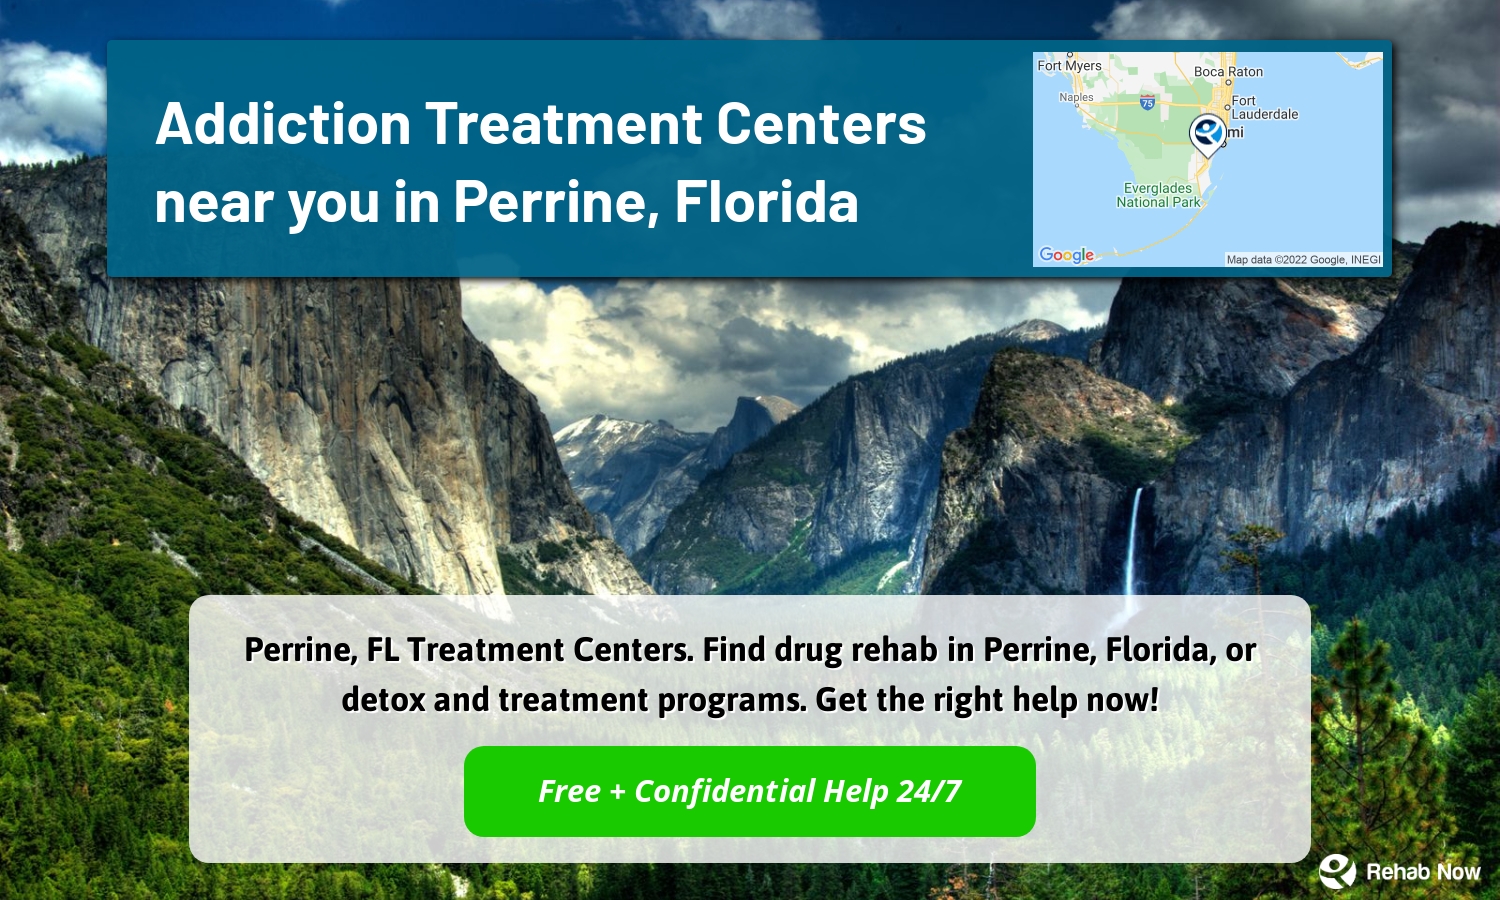 Perrine, FL Treatment Centers. Find drug rehab in Perrine, Florida, or detox and treatment programs. Get the right help now!